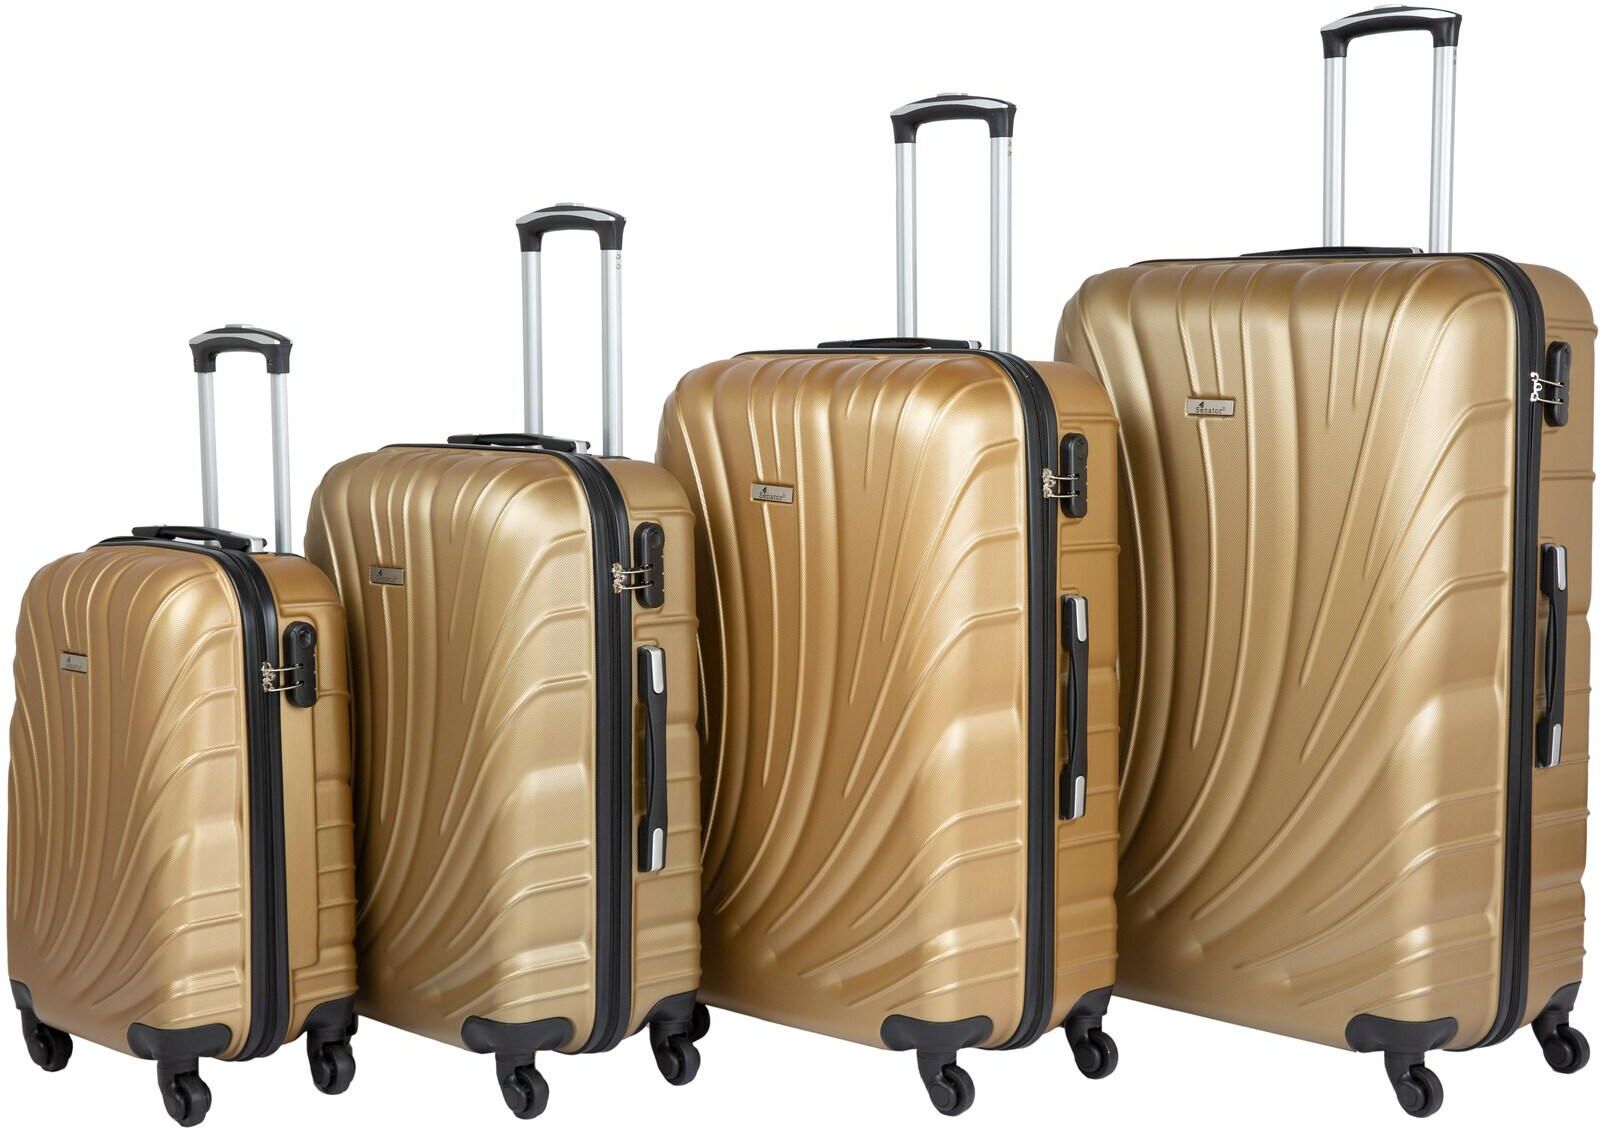 Senator Hard Case Trolley Luggage Set of 4 Suitcase for Unisex ABS Lightweight Travel Bag with 4 Spinner Wheels KH115 Gold